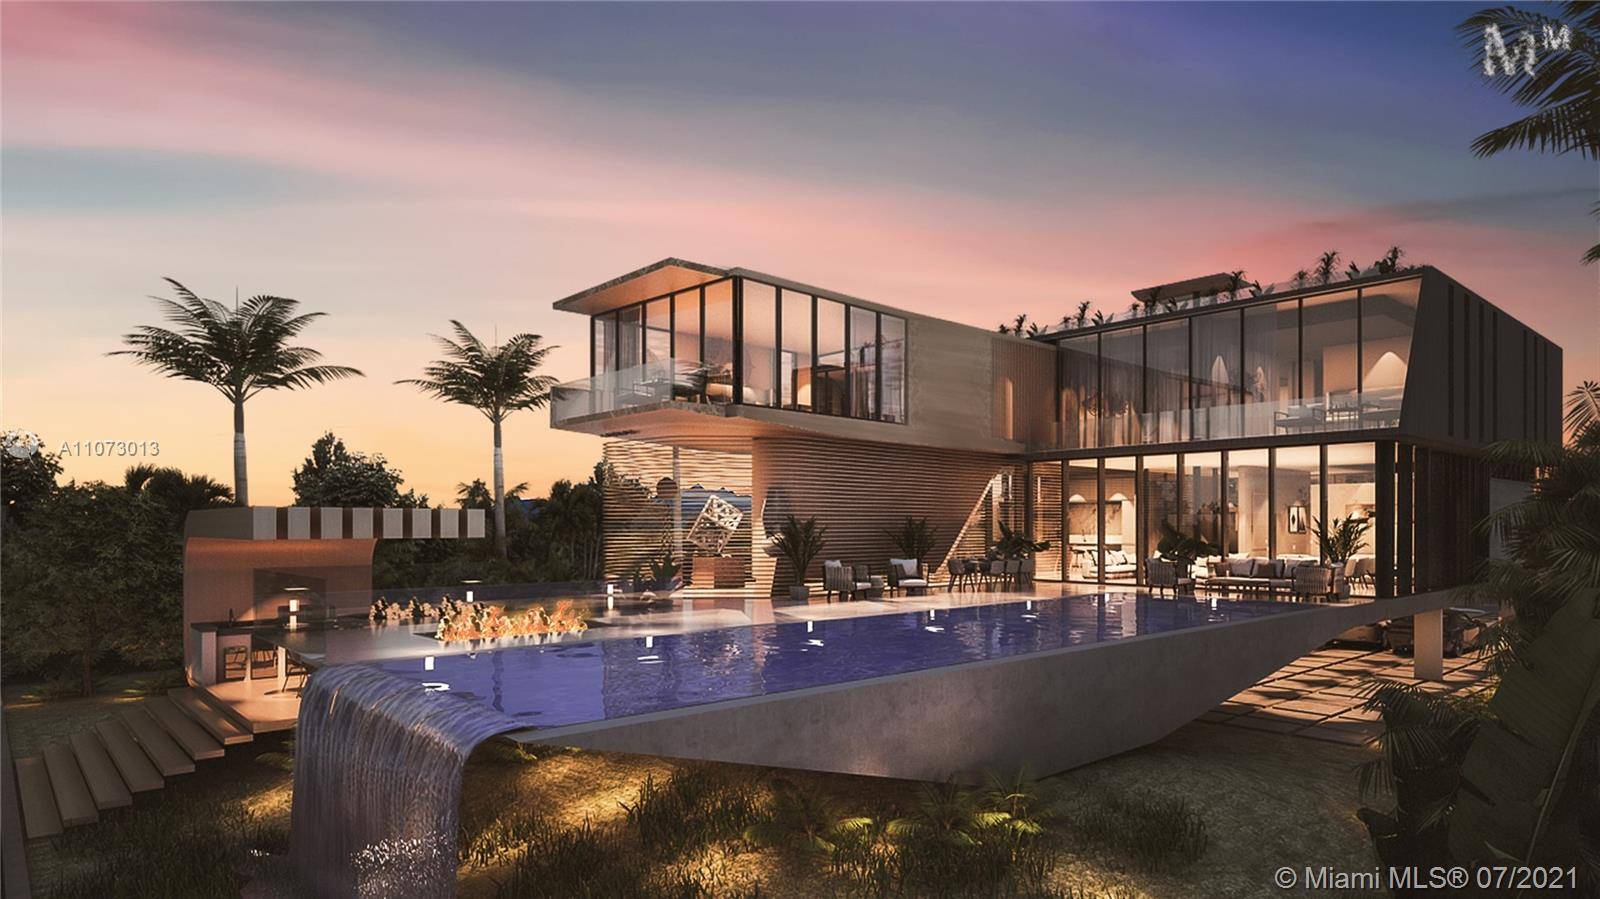 Introducing Miami Beach's most innovative tri level masterpiece by architect Juan Azulay trained w Frank Gehry.